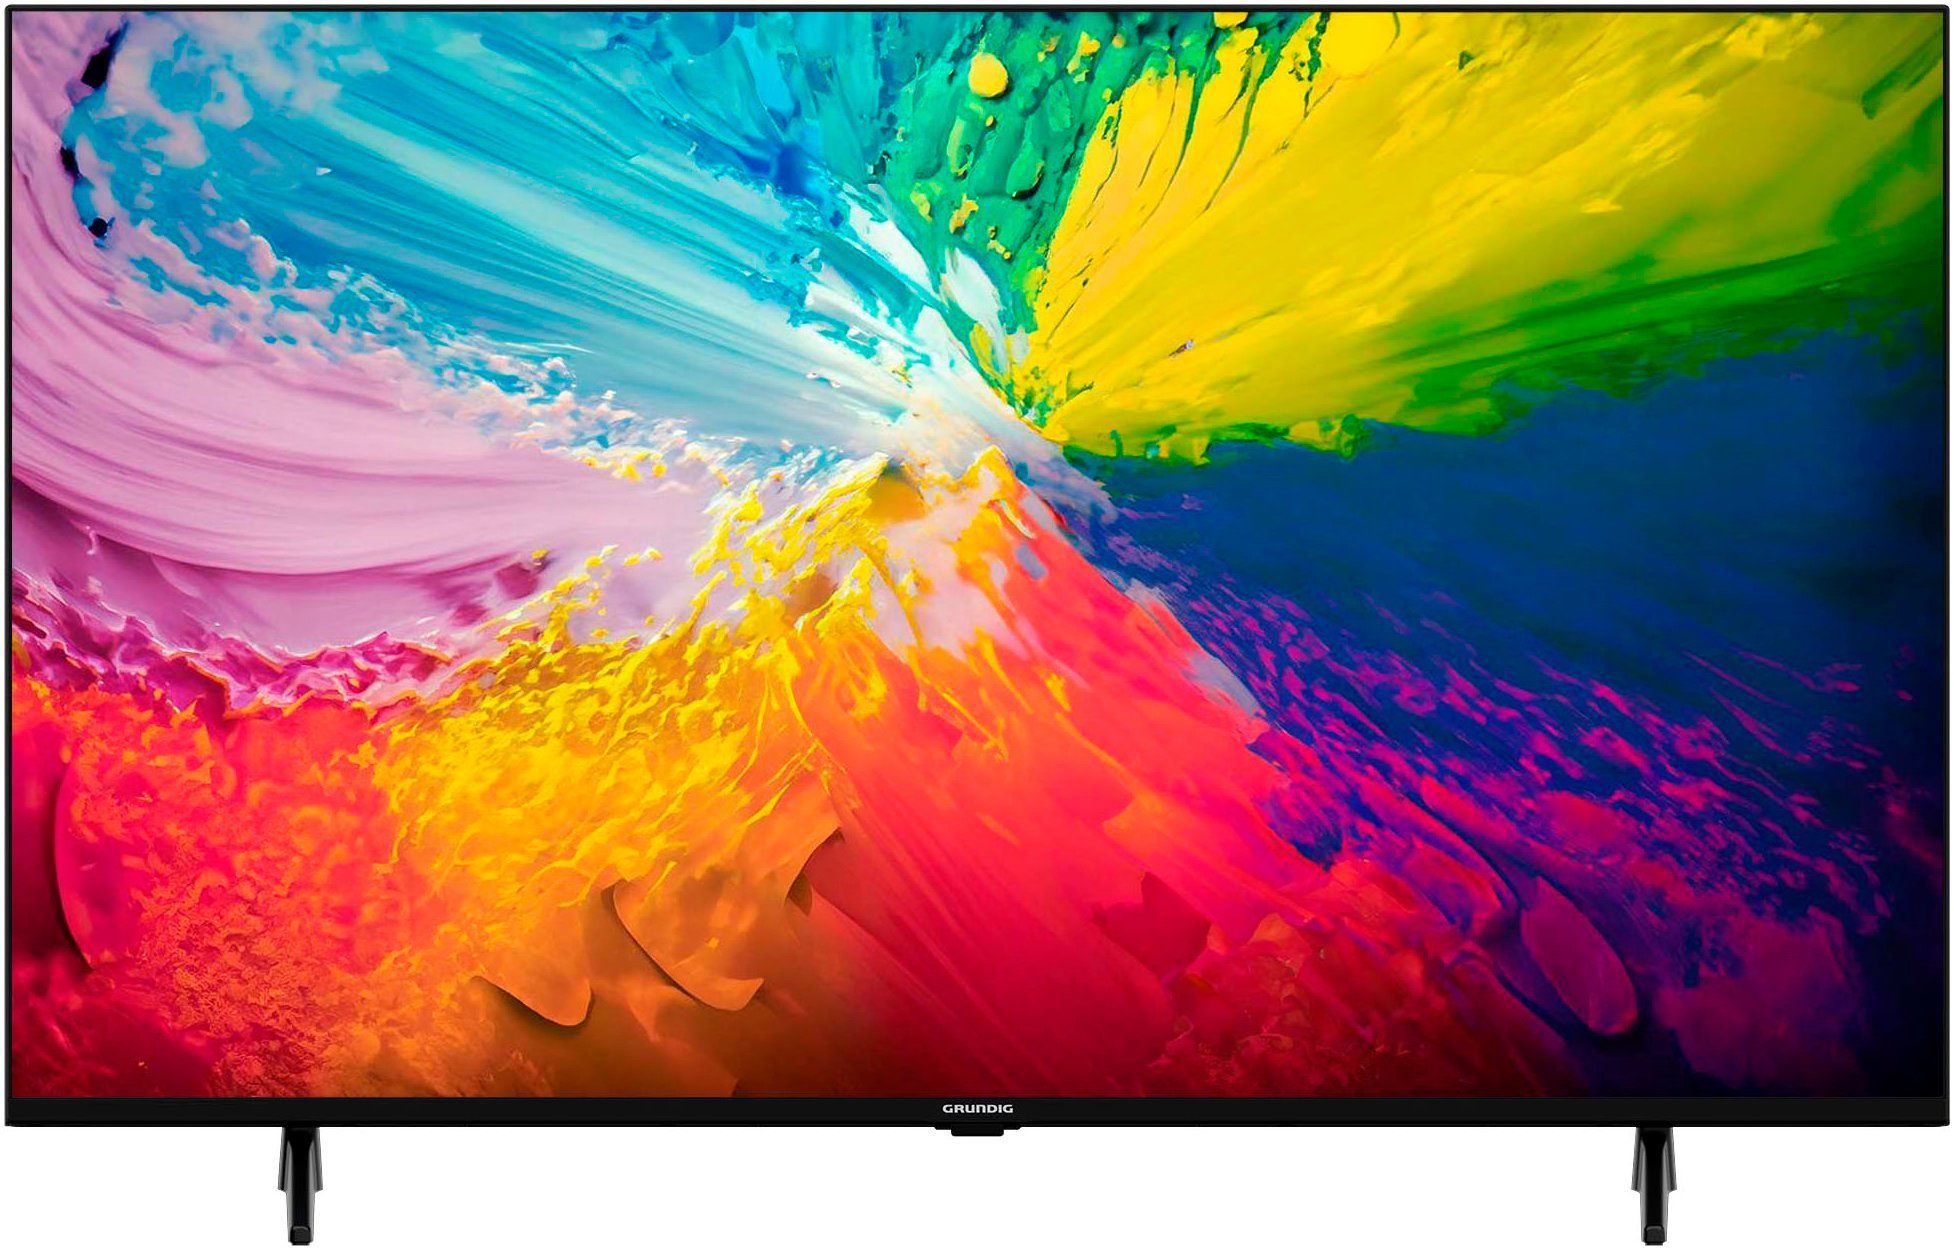 Grundig 43 VOE 73 AU5T00 LED-Fernseher (108 cm/43 Zoll, 4K Ultra HD,  Android TV)